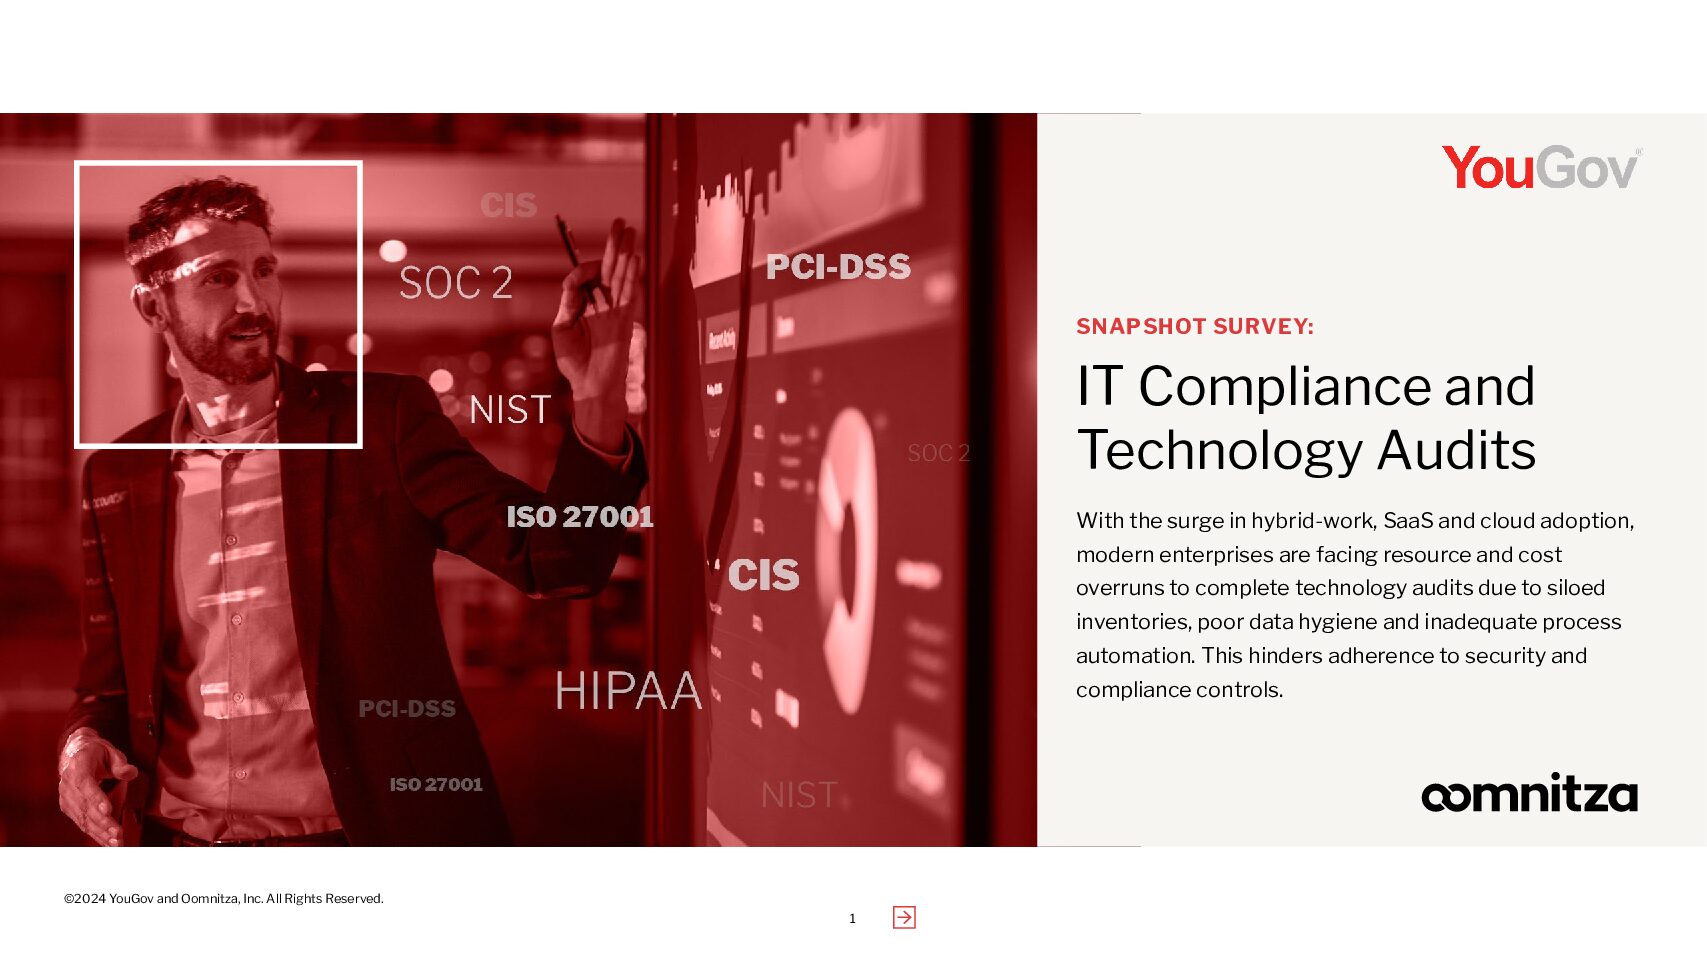 Featured image for Snapshot Survey: IT Compliance and Technology Audits